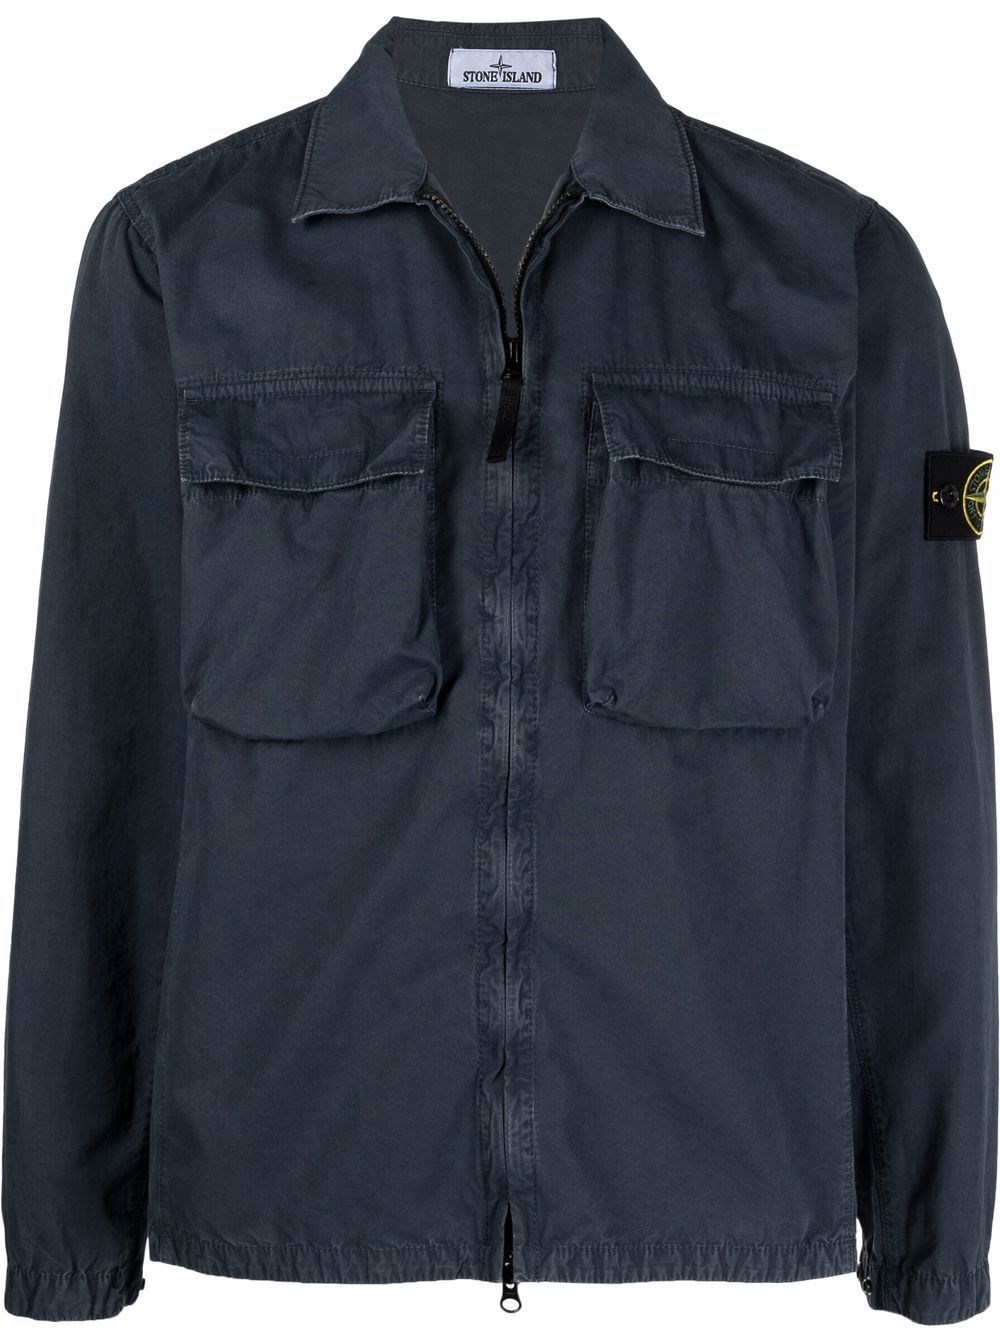 STONE ISLAND Jackets On Sale, Up To 70% Off | ModeSens